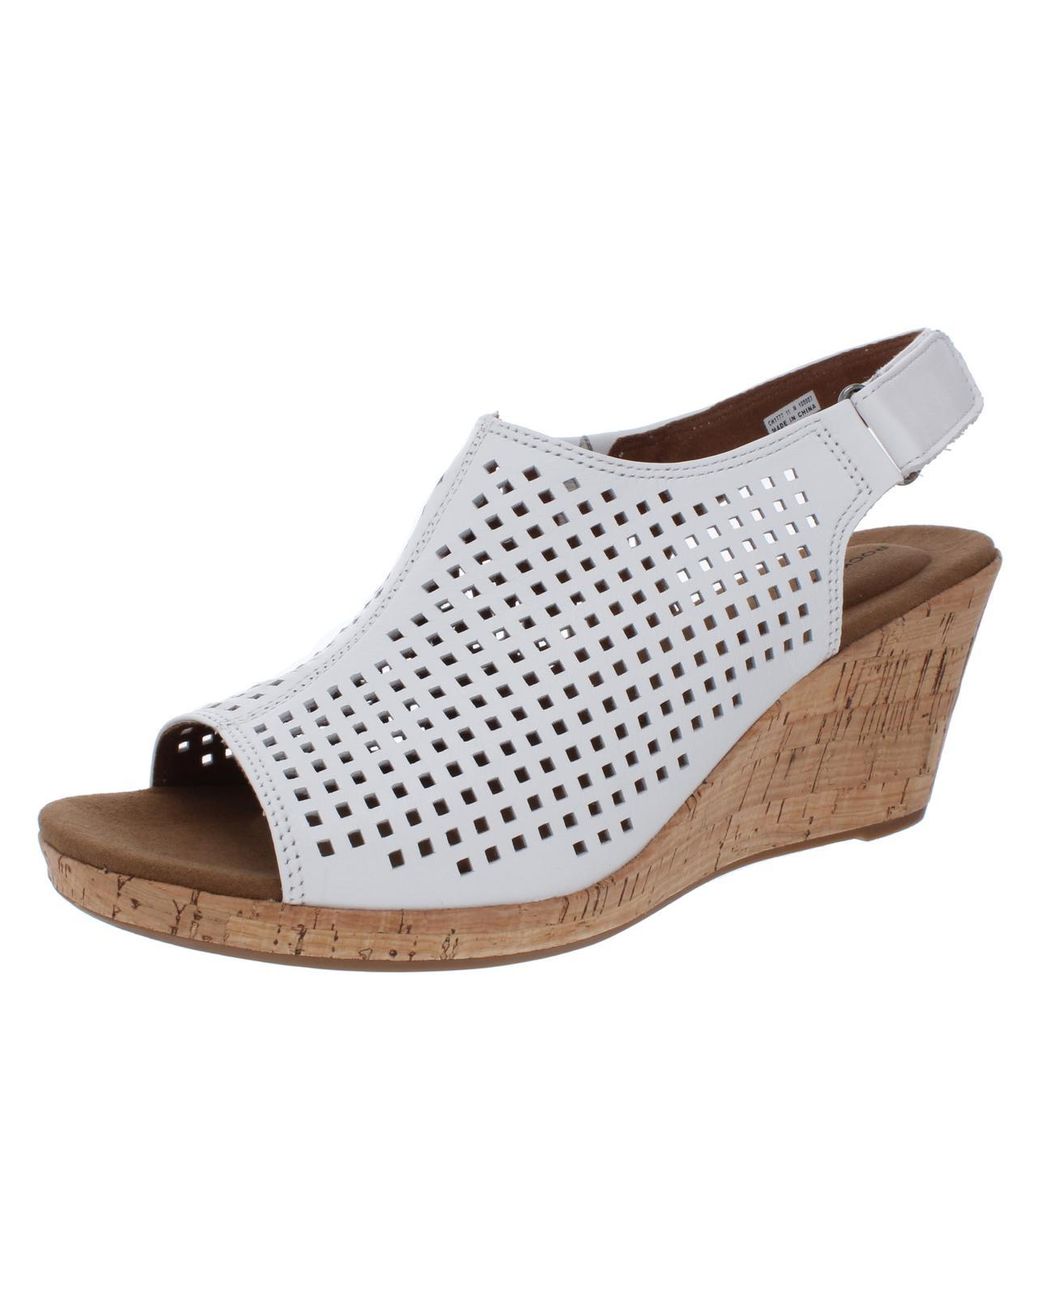 Rockport Briah Perforated Cork Wedge Sandals in White | Lyst